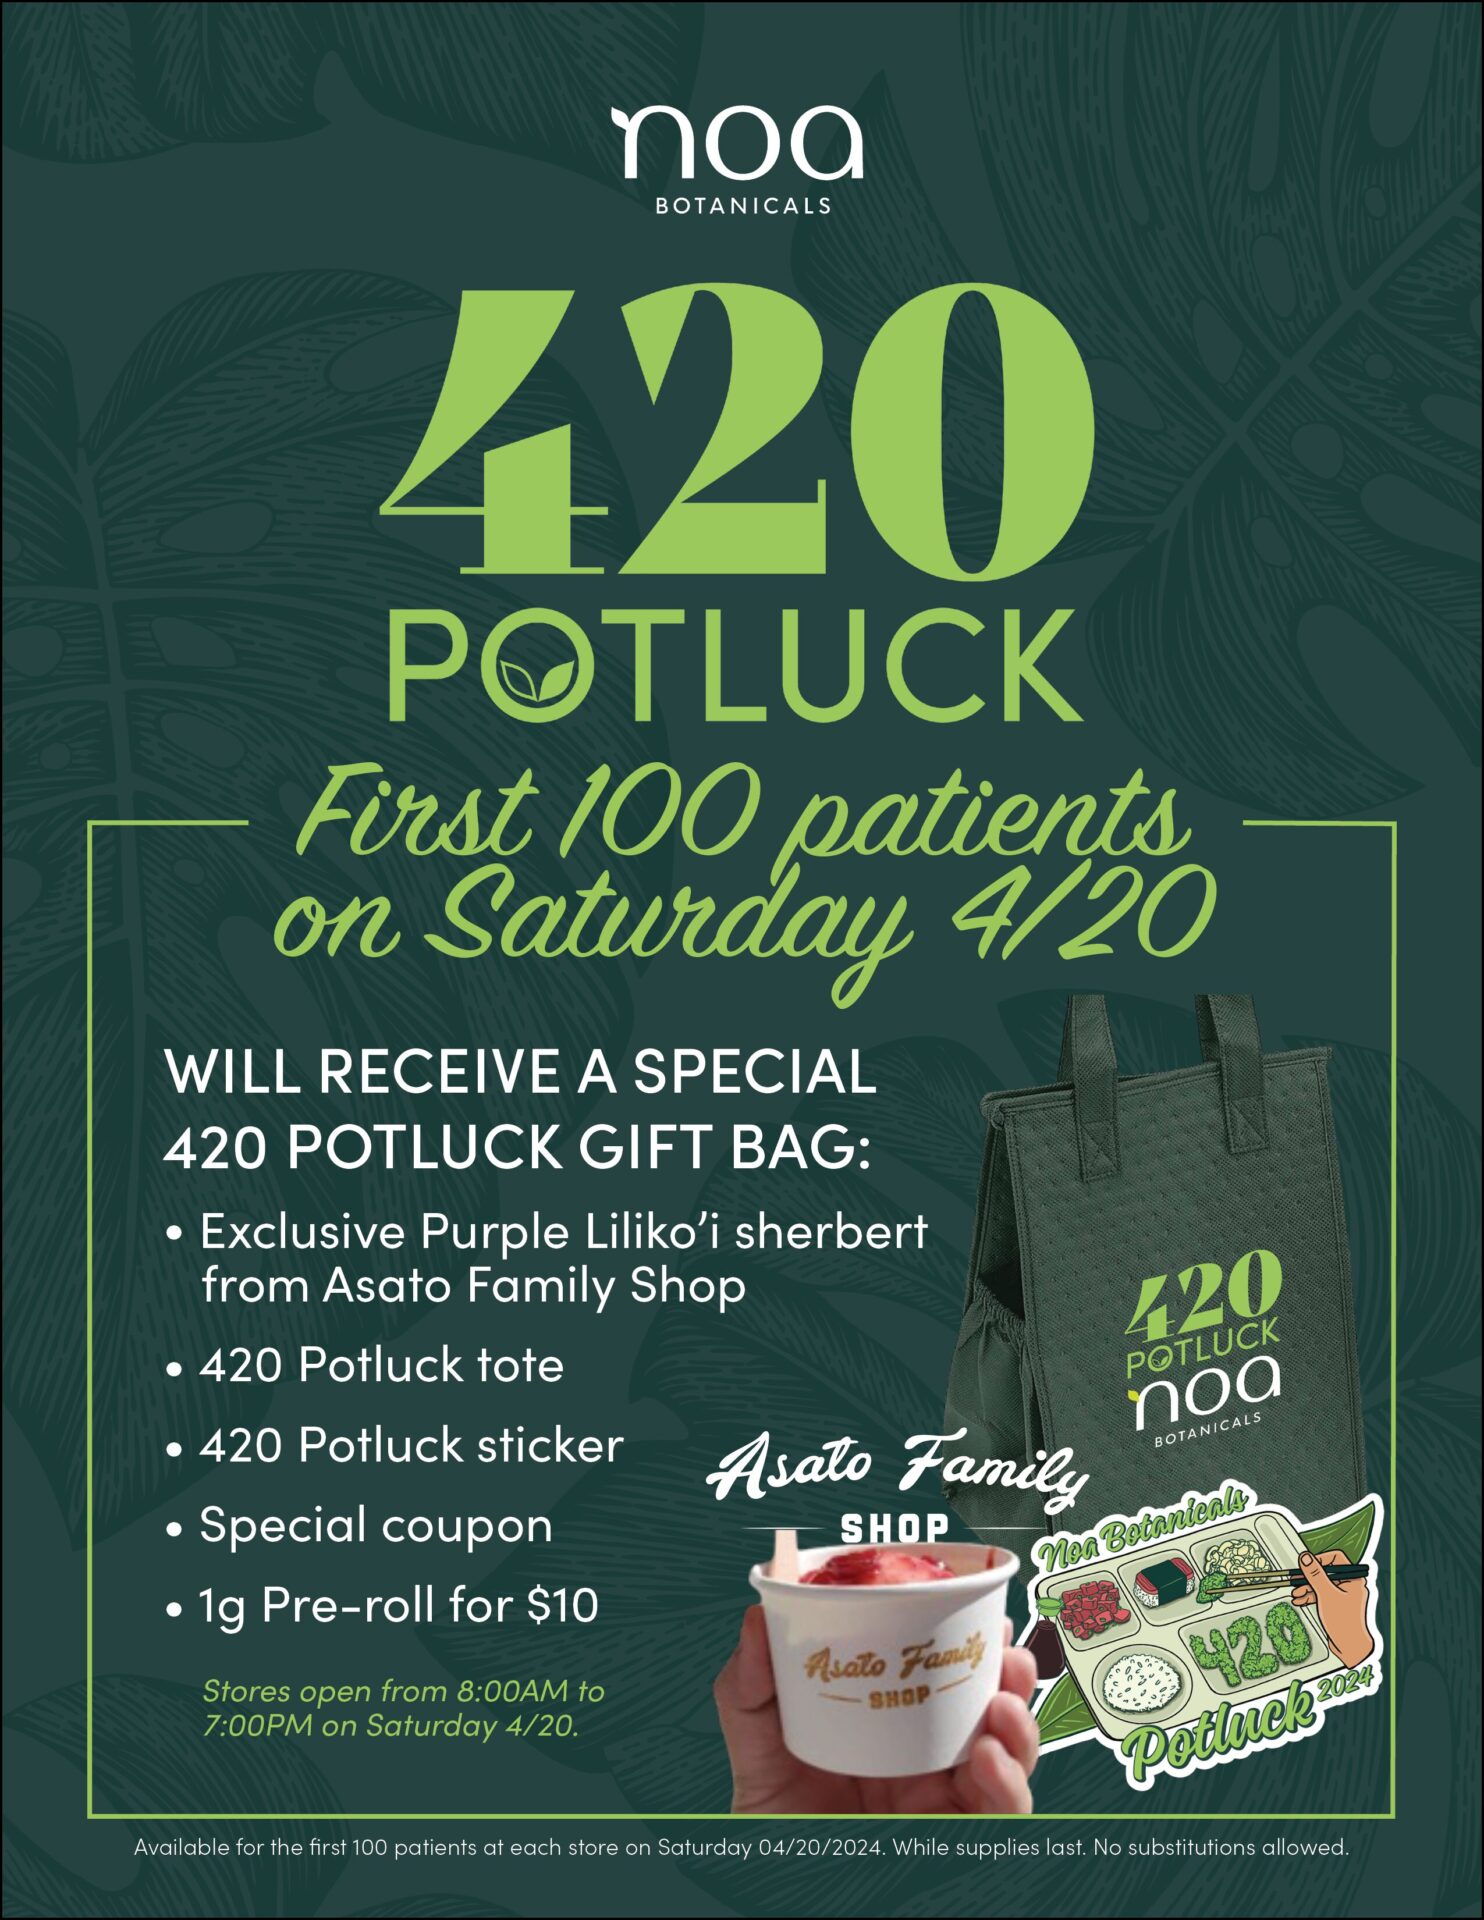 Promotional poster for noa botanicals announcing a '420 potluck' event with offers for the first 100 patients on april 20, featuring store items and opening hours.